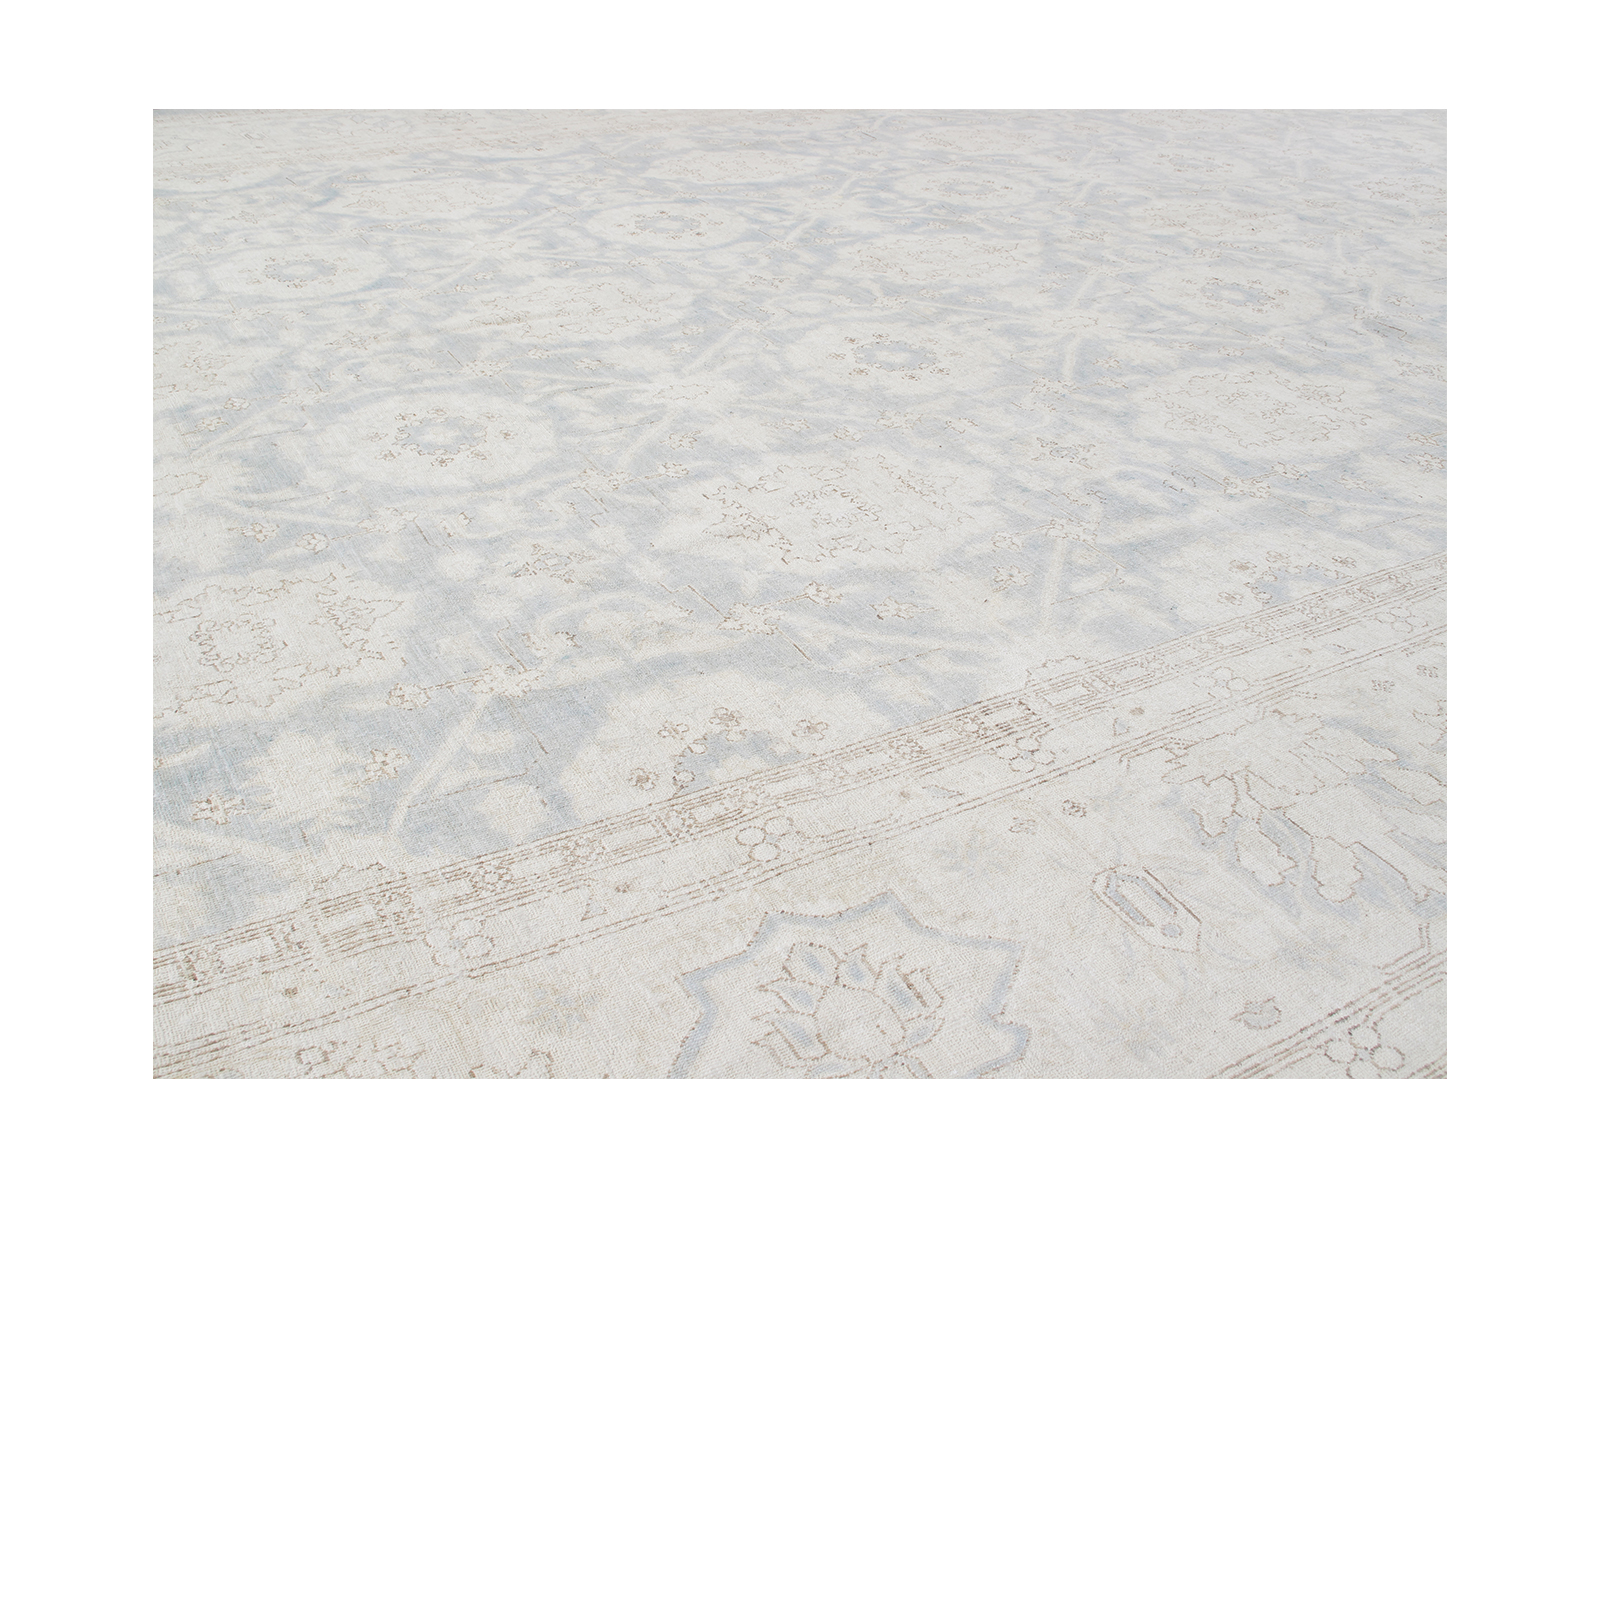 Agra rug is hand-knotted with a traditional style and 100% wool.